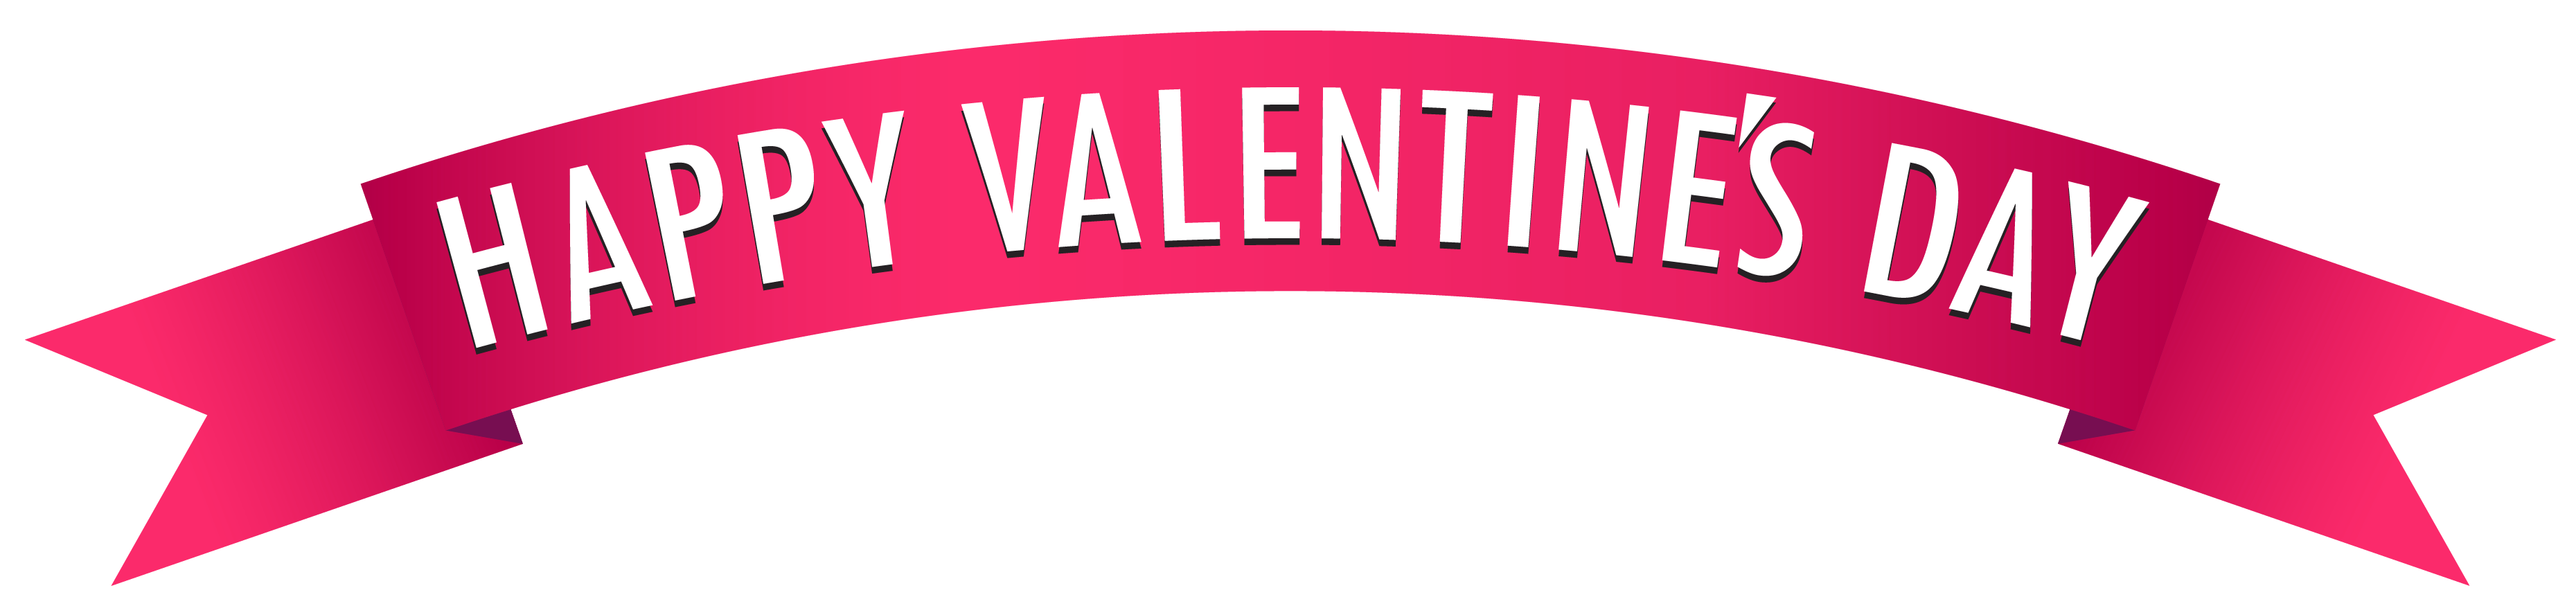 valentine's day banners clipart - photo #21